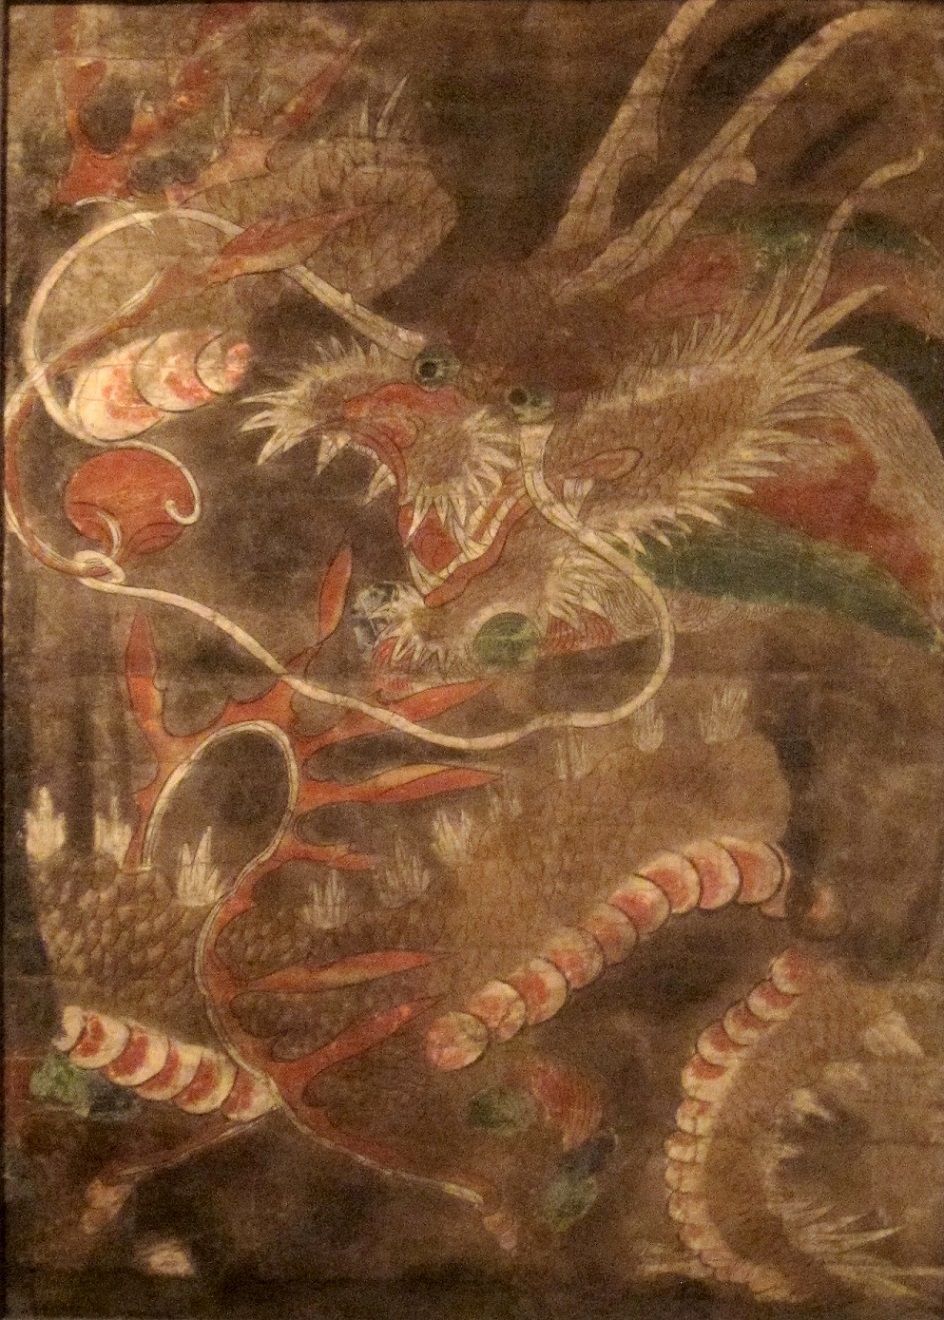 Korean_ink_and_color_painting_of_dragon,_18th_century,_Chosôn_dynasty,_Honolulu_Academy_of_Arts.jpg